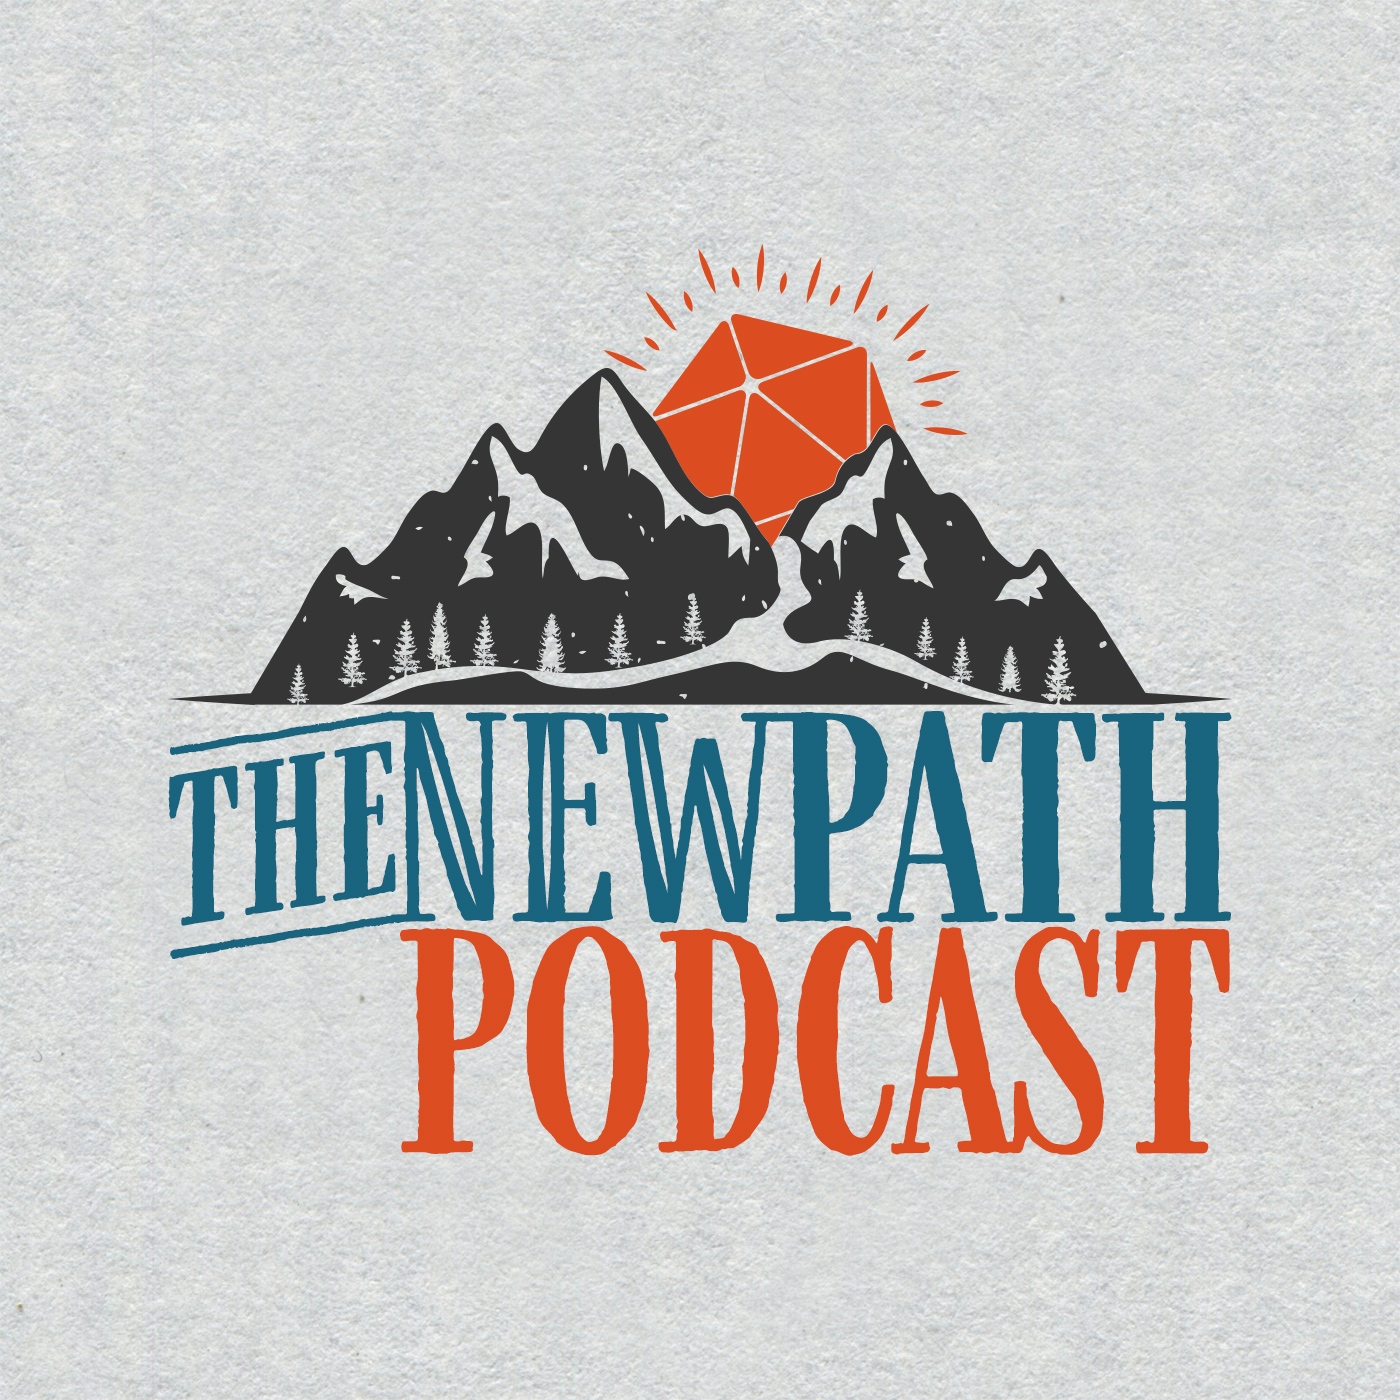 Artwork for podcast The New Path Podcast